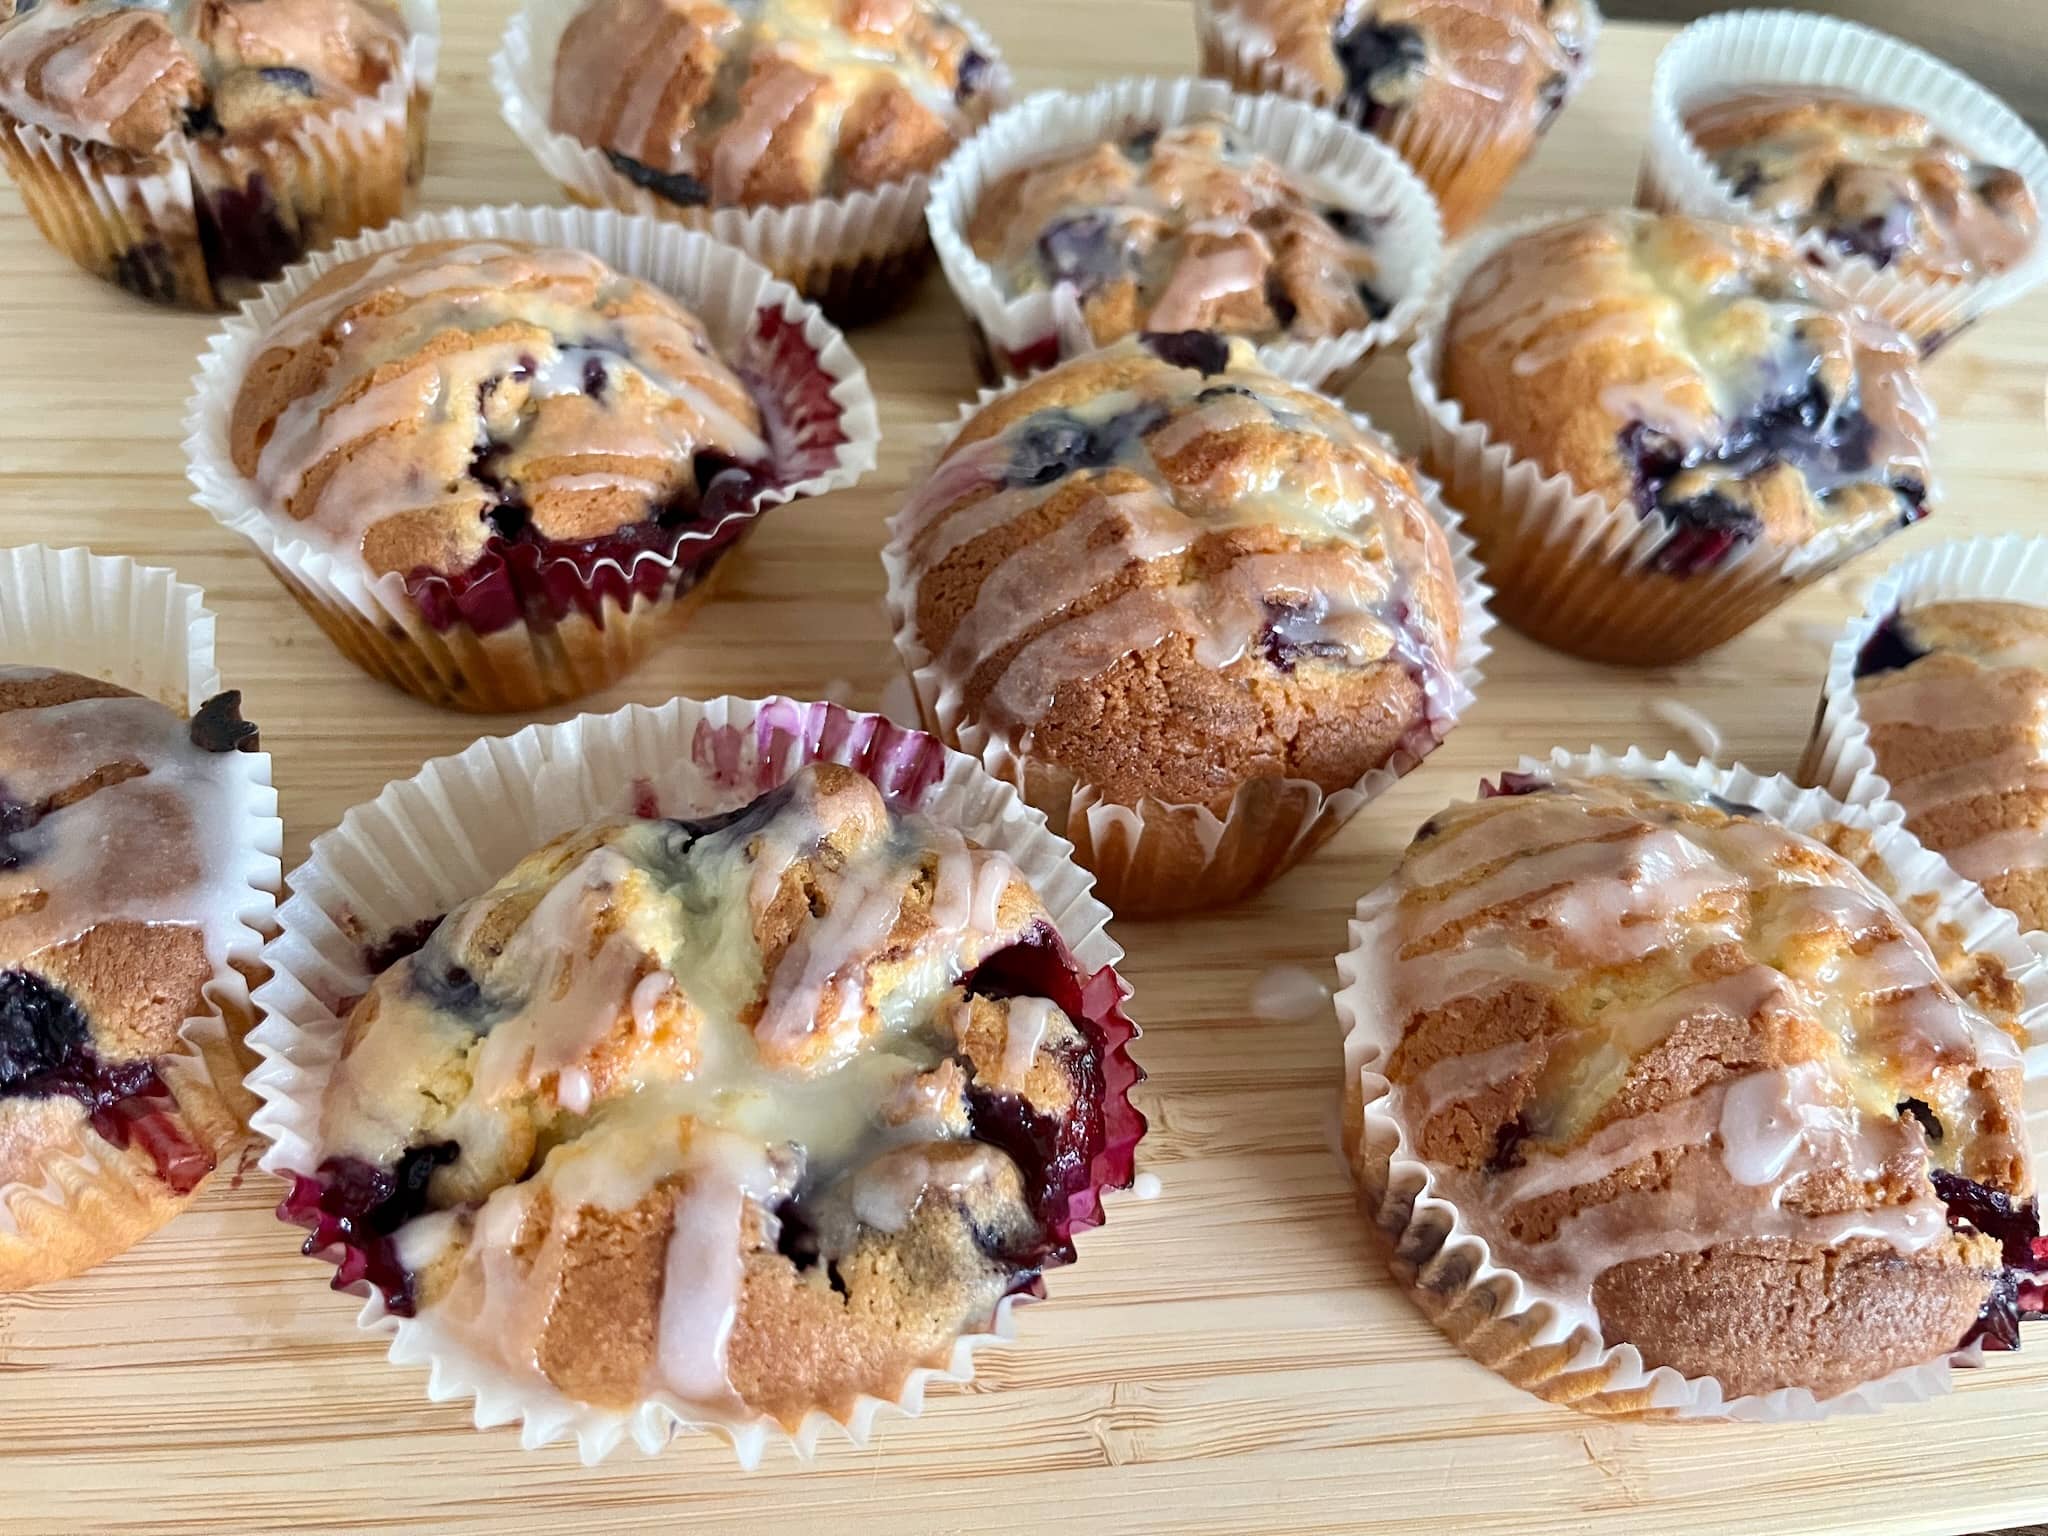 Glazed blueberry muffins on the board